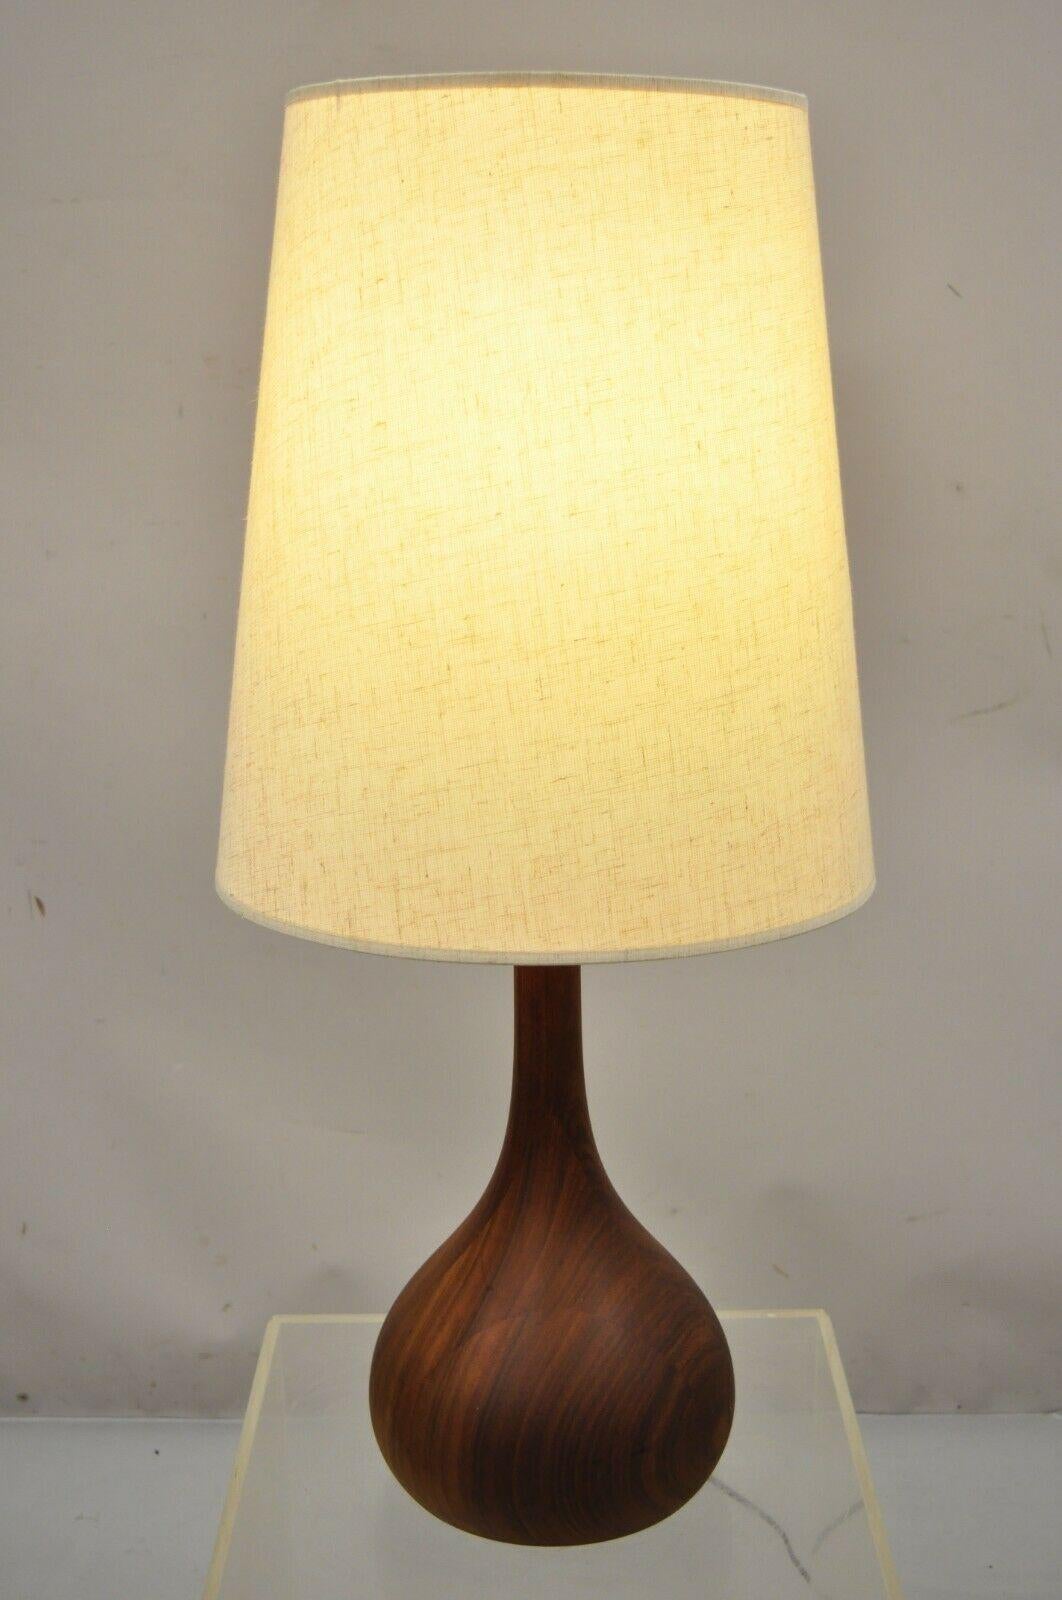 Mid-century Danish modern staved teak wood bulbous sculpted table lamp. Item features solid teak wood construction, clean modernist lines, sleek sculptural form, includes original shade. Circa mid-20th century.
Measurements:
33